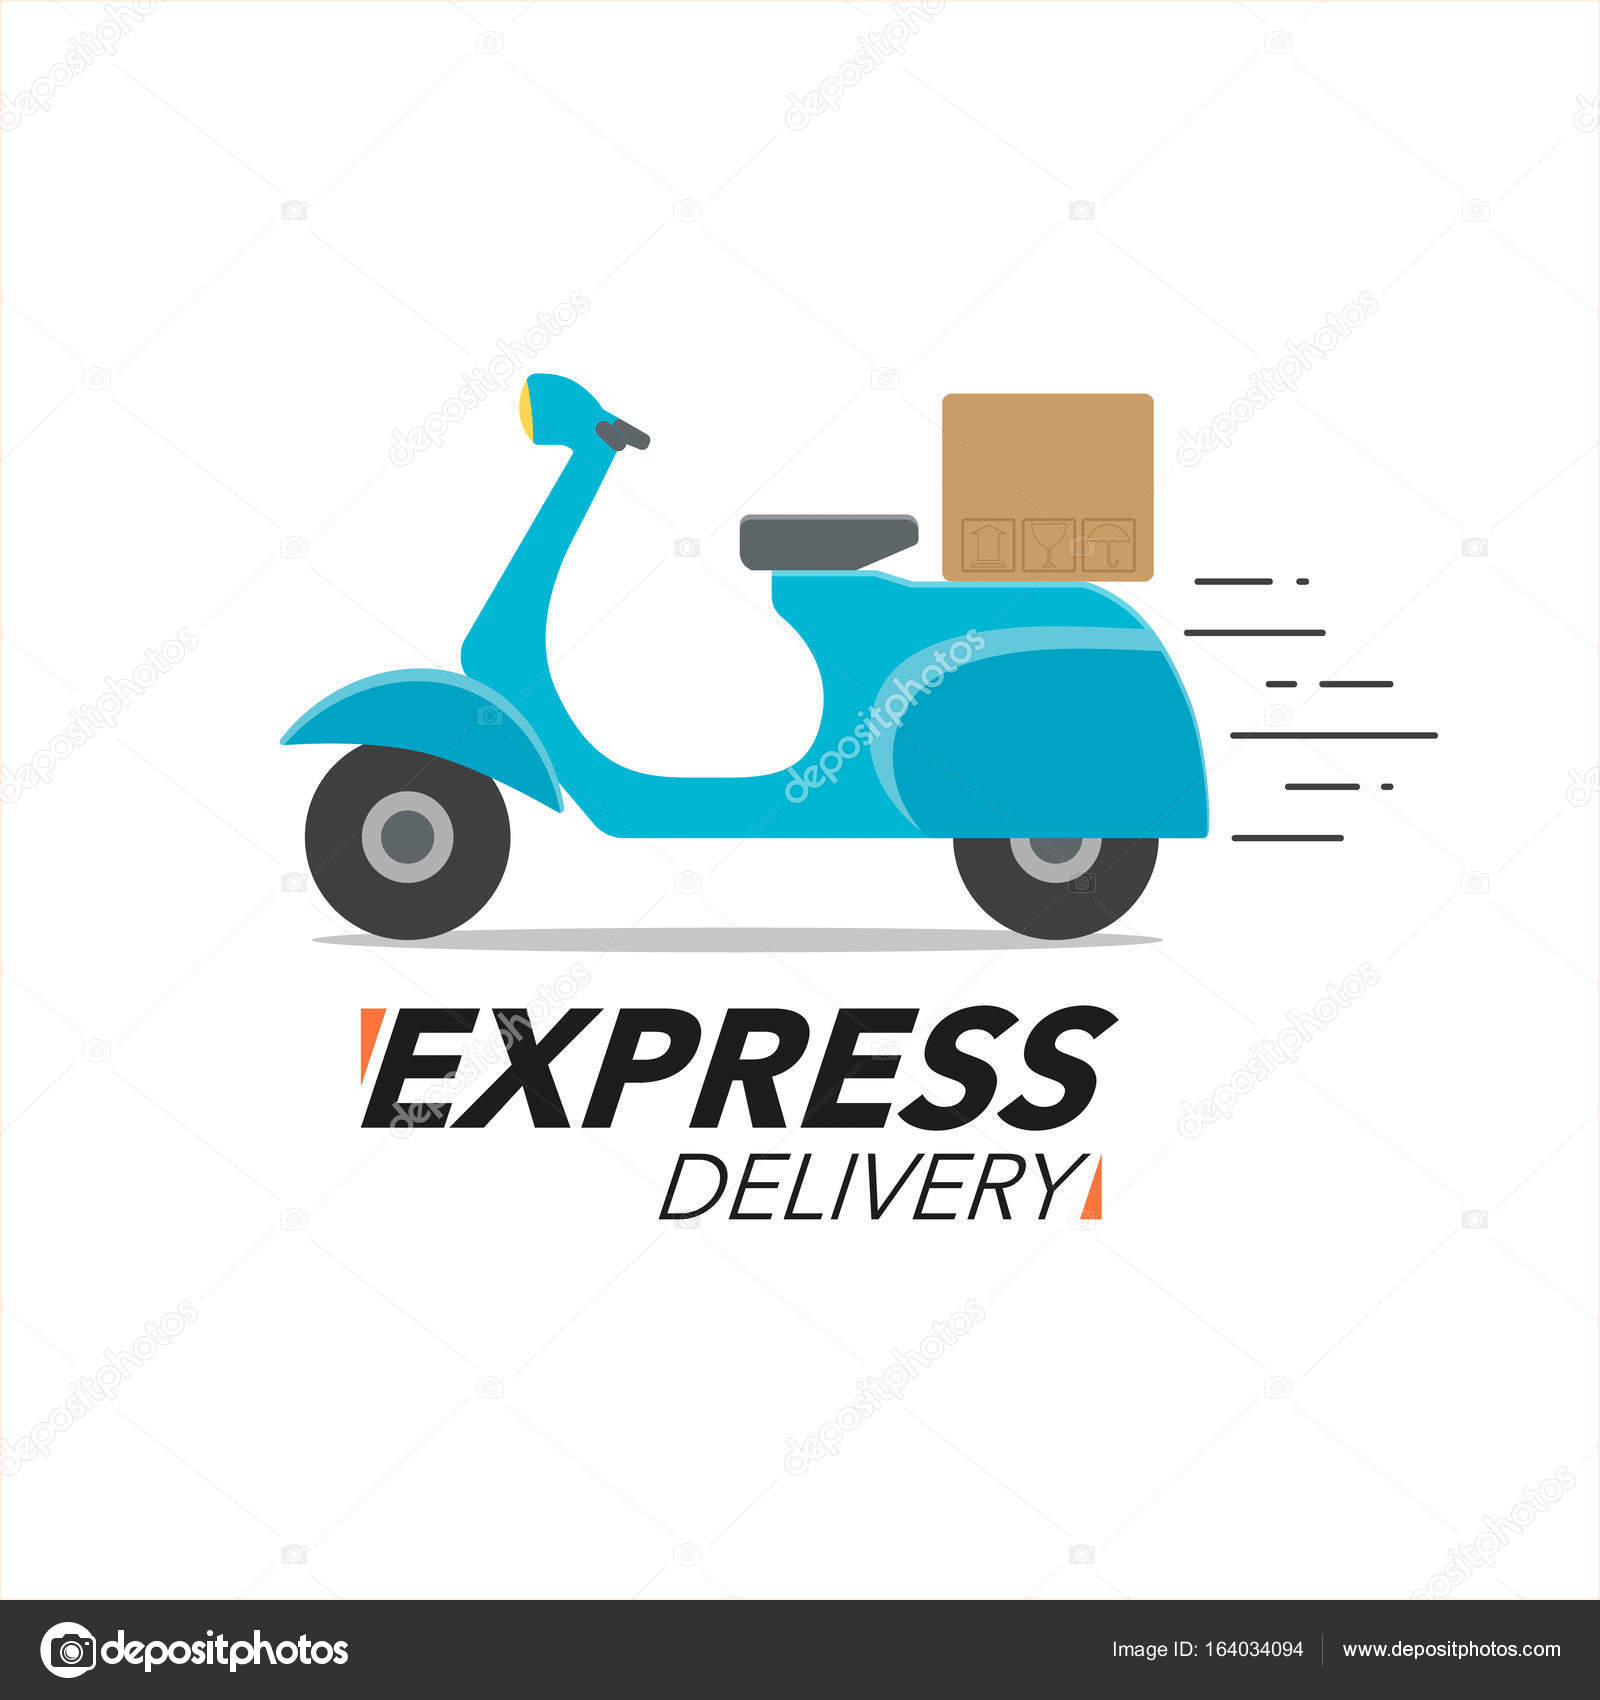 Express delivery icon concept. Scooter motorcycle service, order Stock  Vector by ©koson.photo.gmail.com 164034094